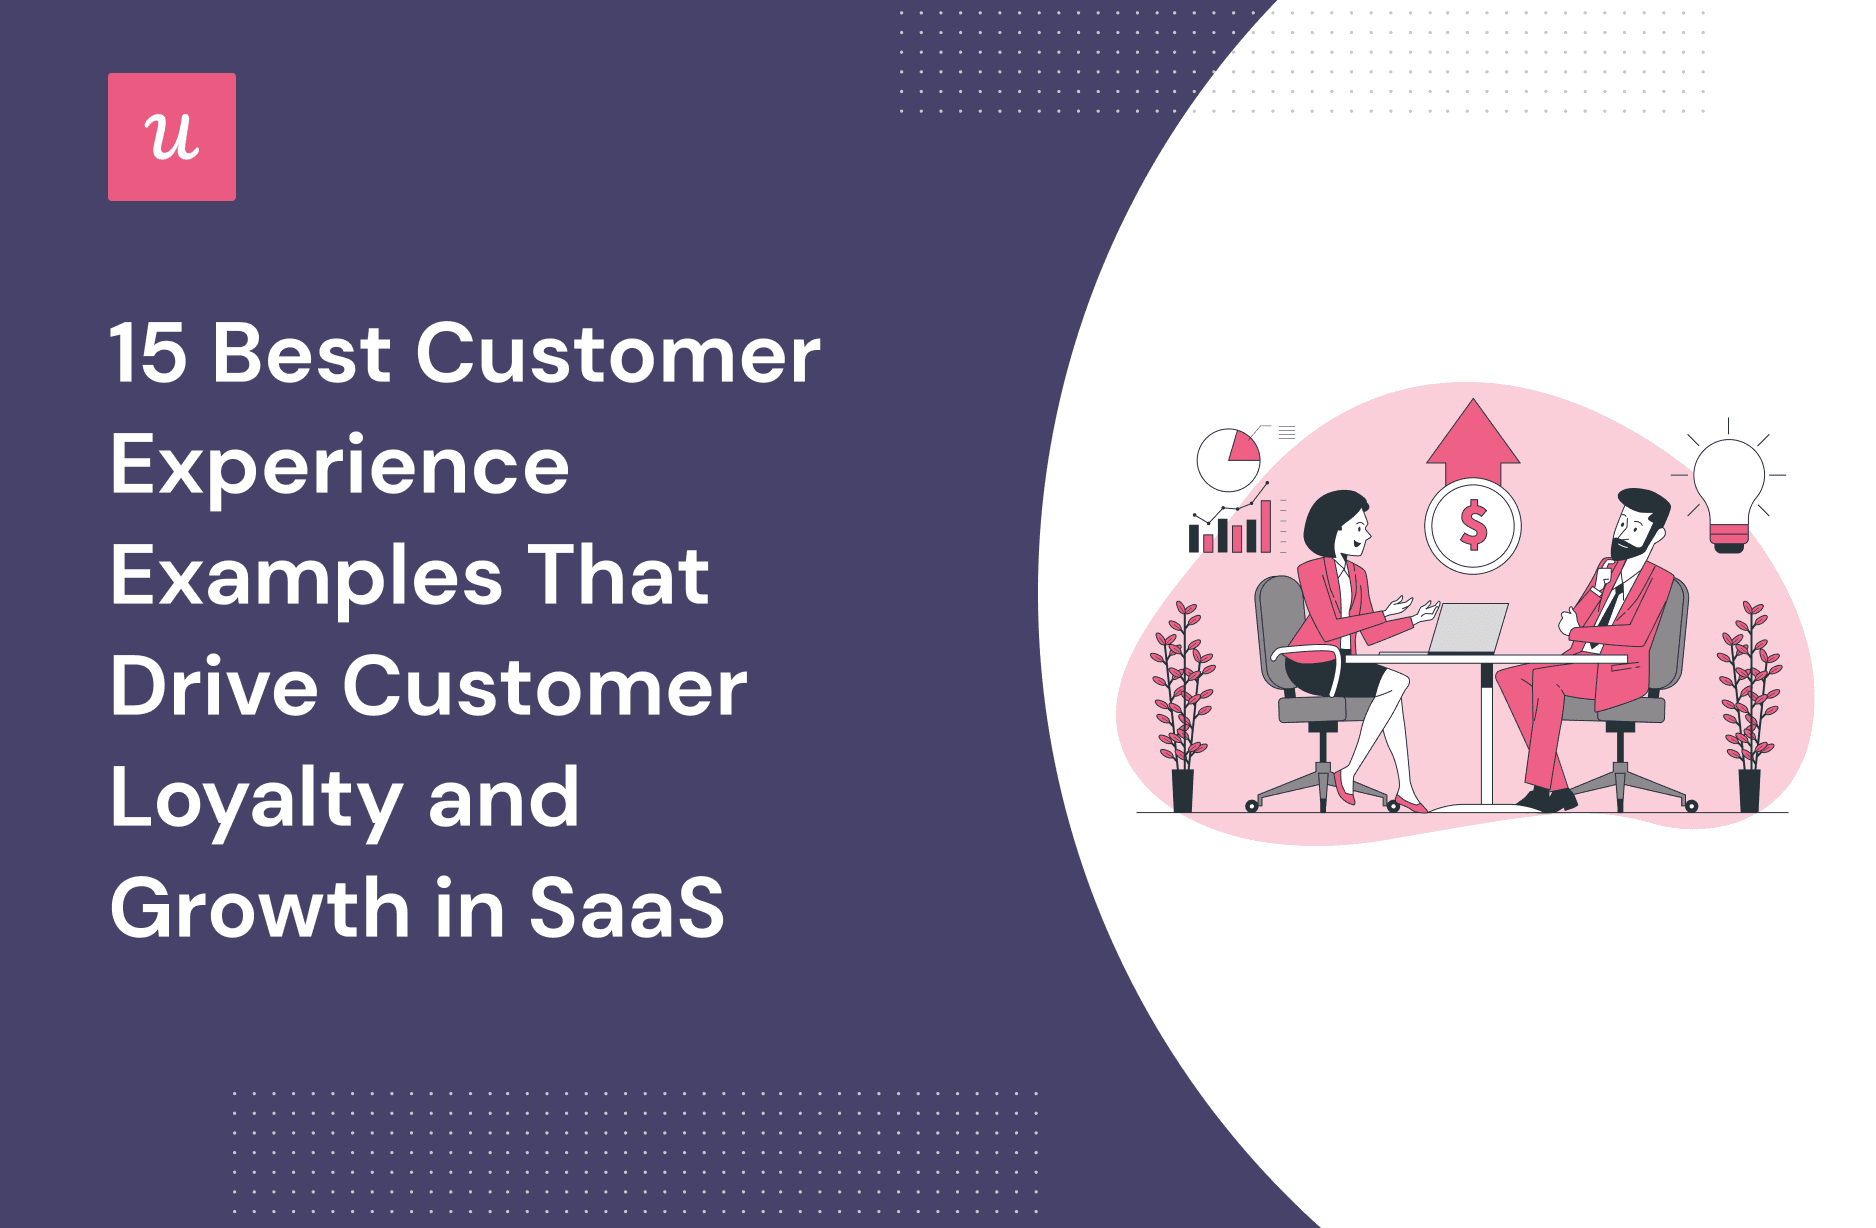 15 Best Customer Experience Examples That Drive Customer Loyalty and Growth in SaaS cover